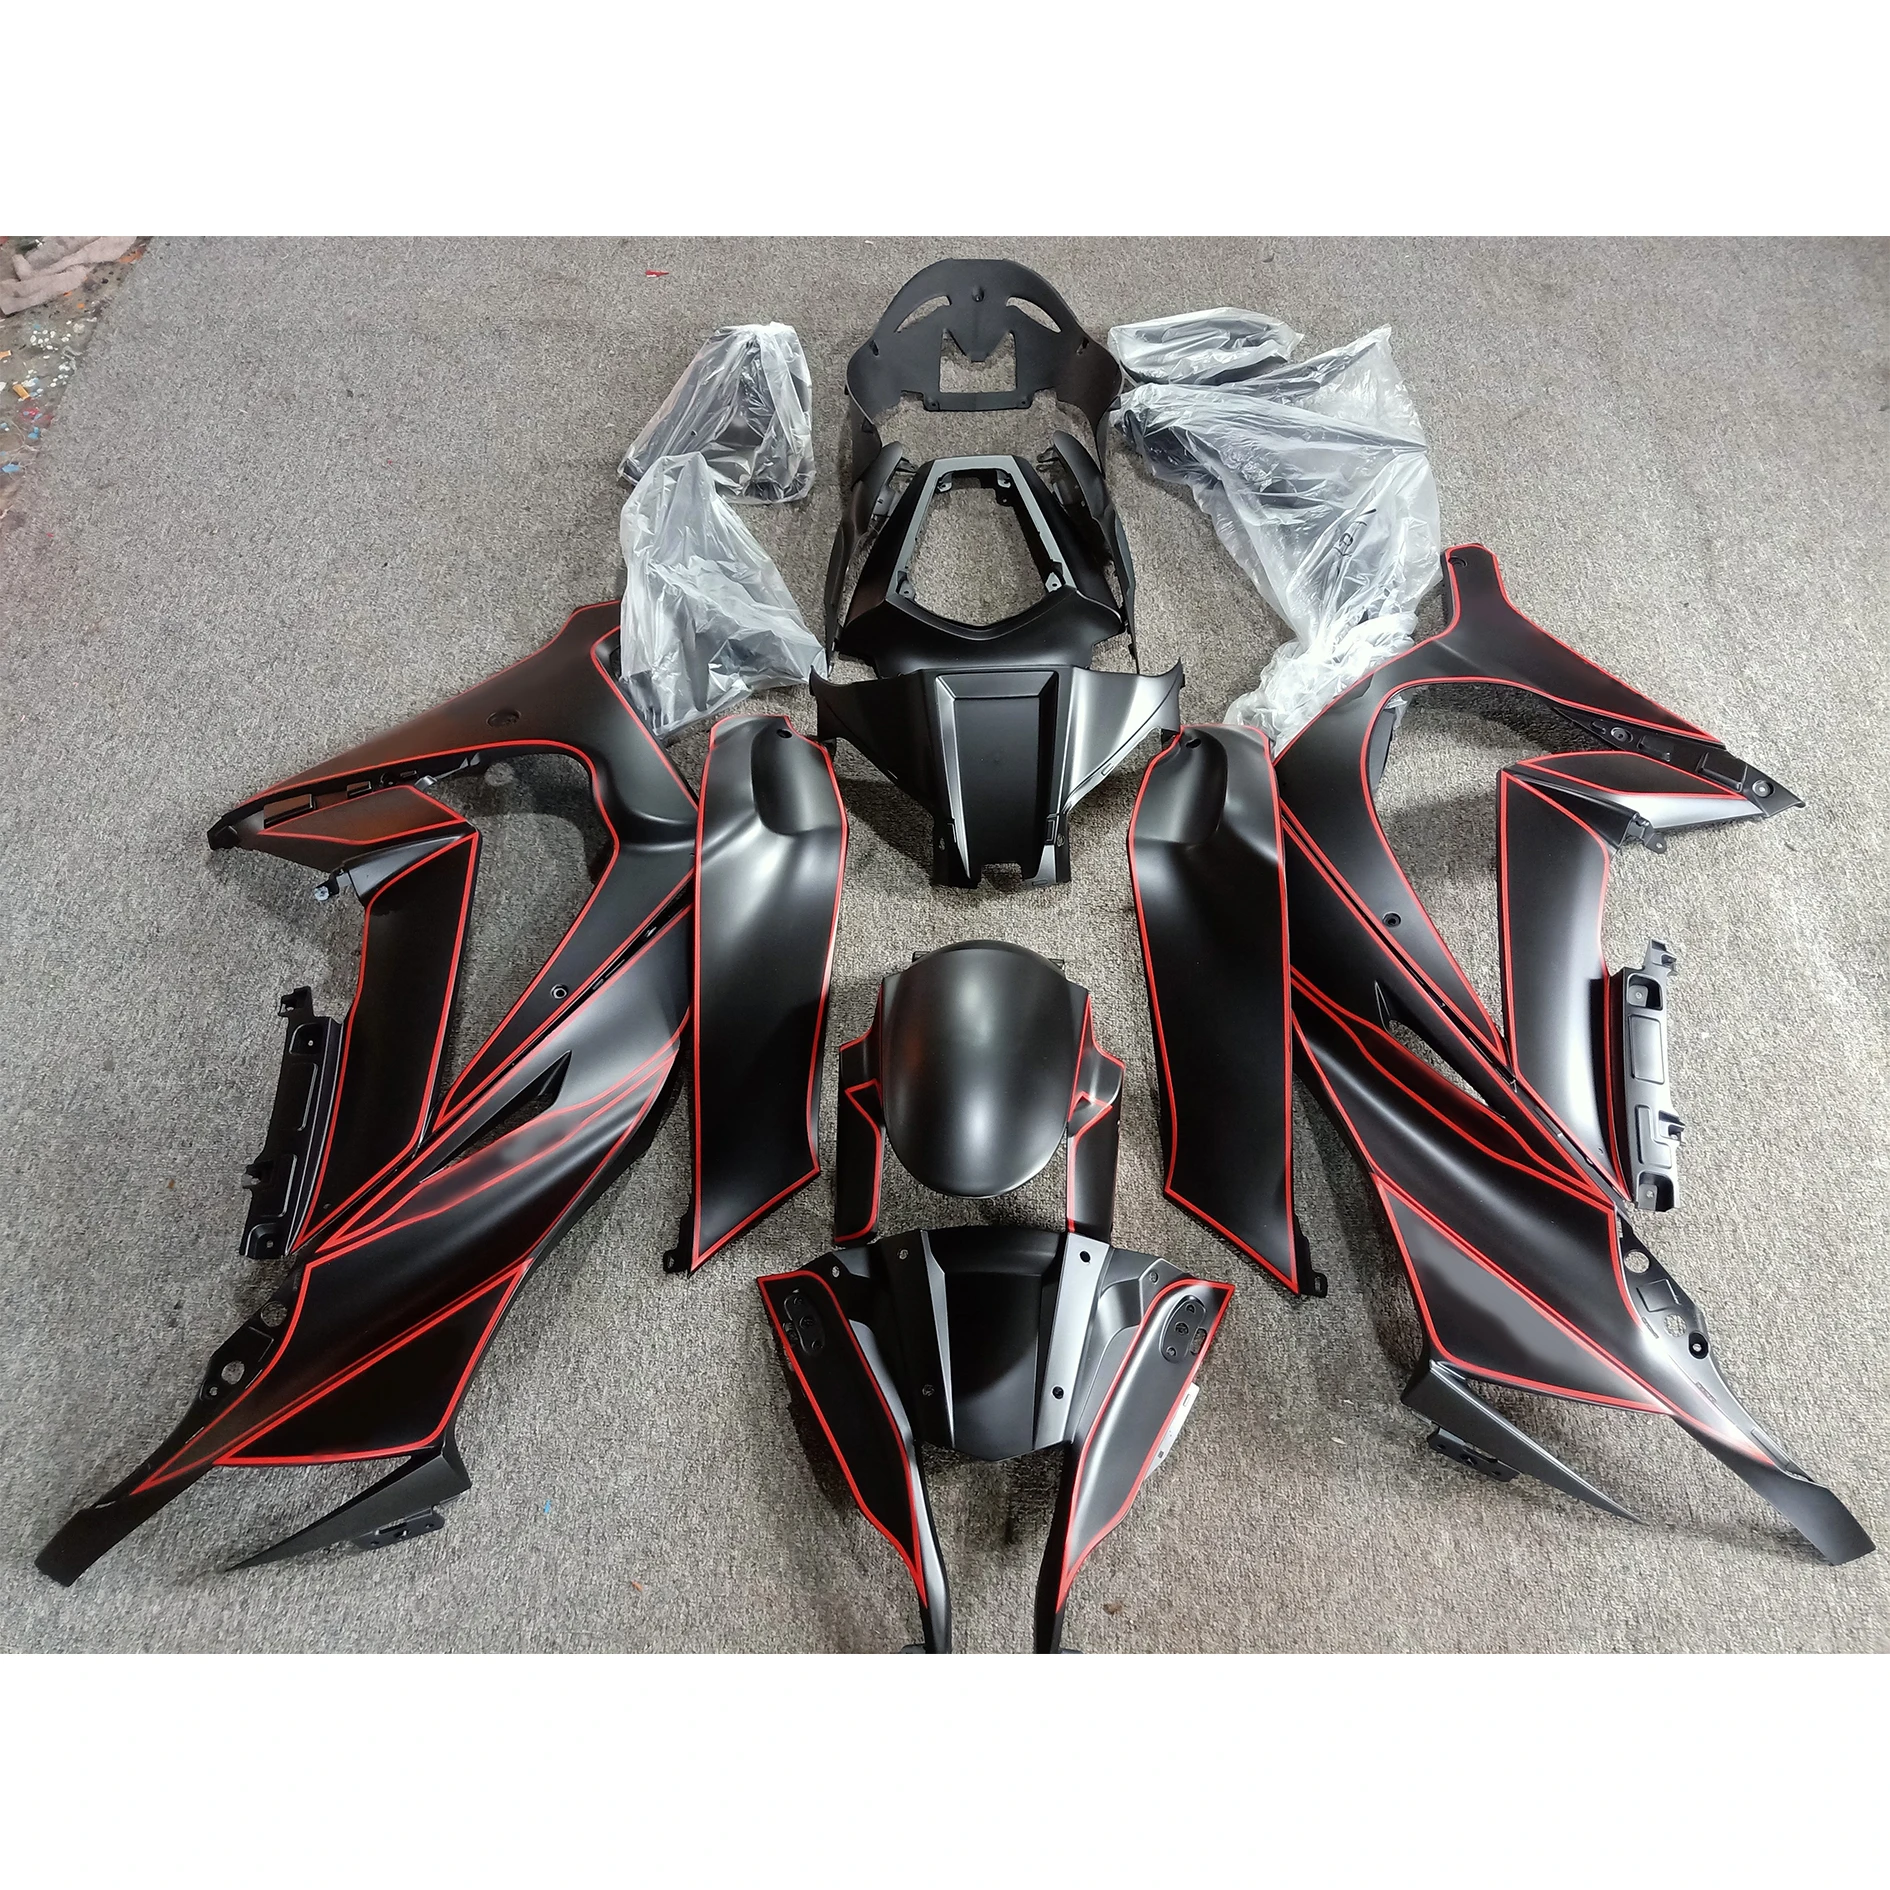 

2021 WHSC Red And Black Motorcycle Accessories For KAWASAKI ZX-10R 2011-2015 Custom Cover Body ABS Plastic Fairings Kit, Pictures shown